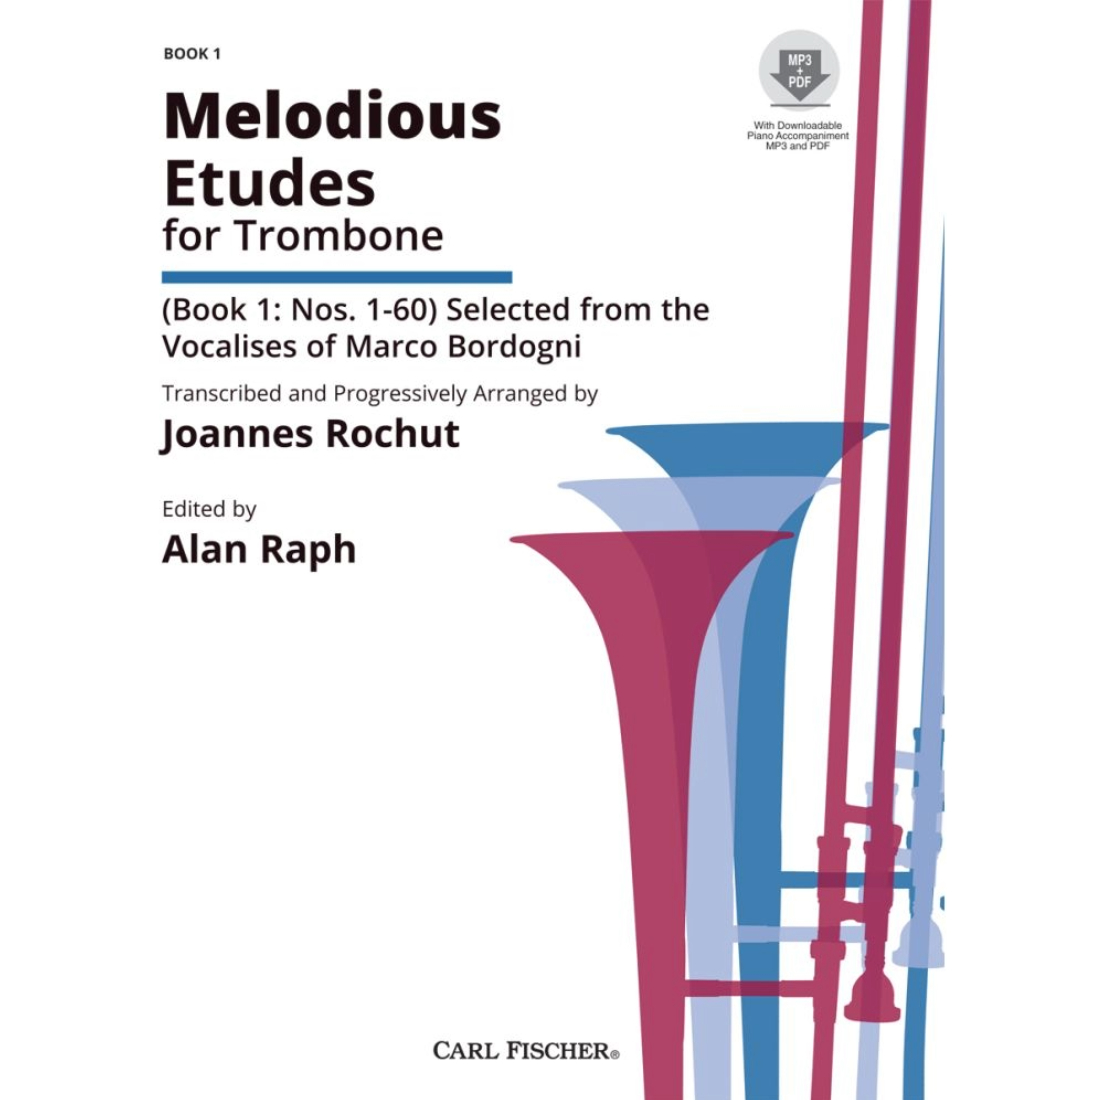 White cover with silhouettes of trombones on the right, titled Melodious Etudes for Trombone